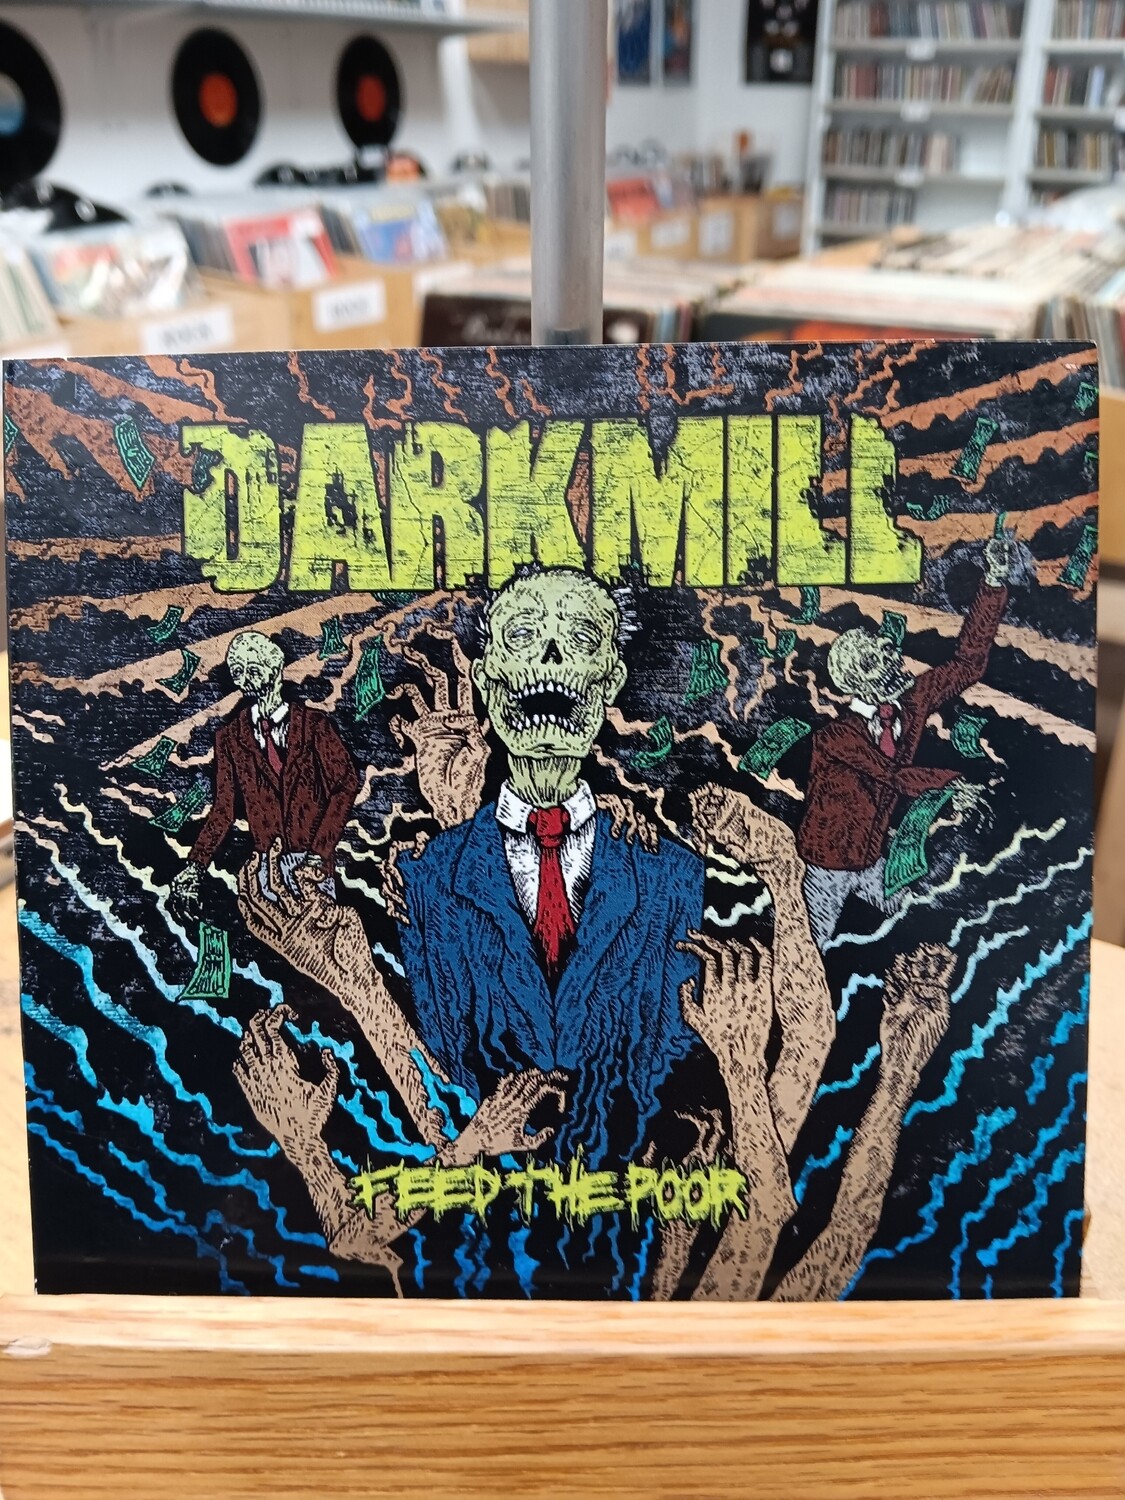 DARKMILL - Feed the poor (CD)